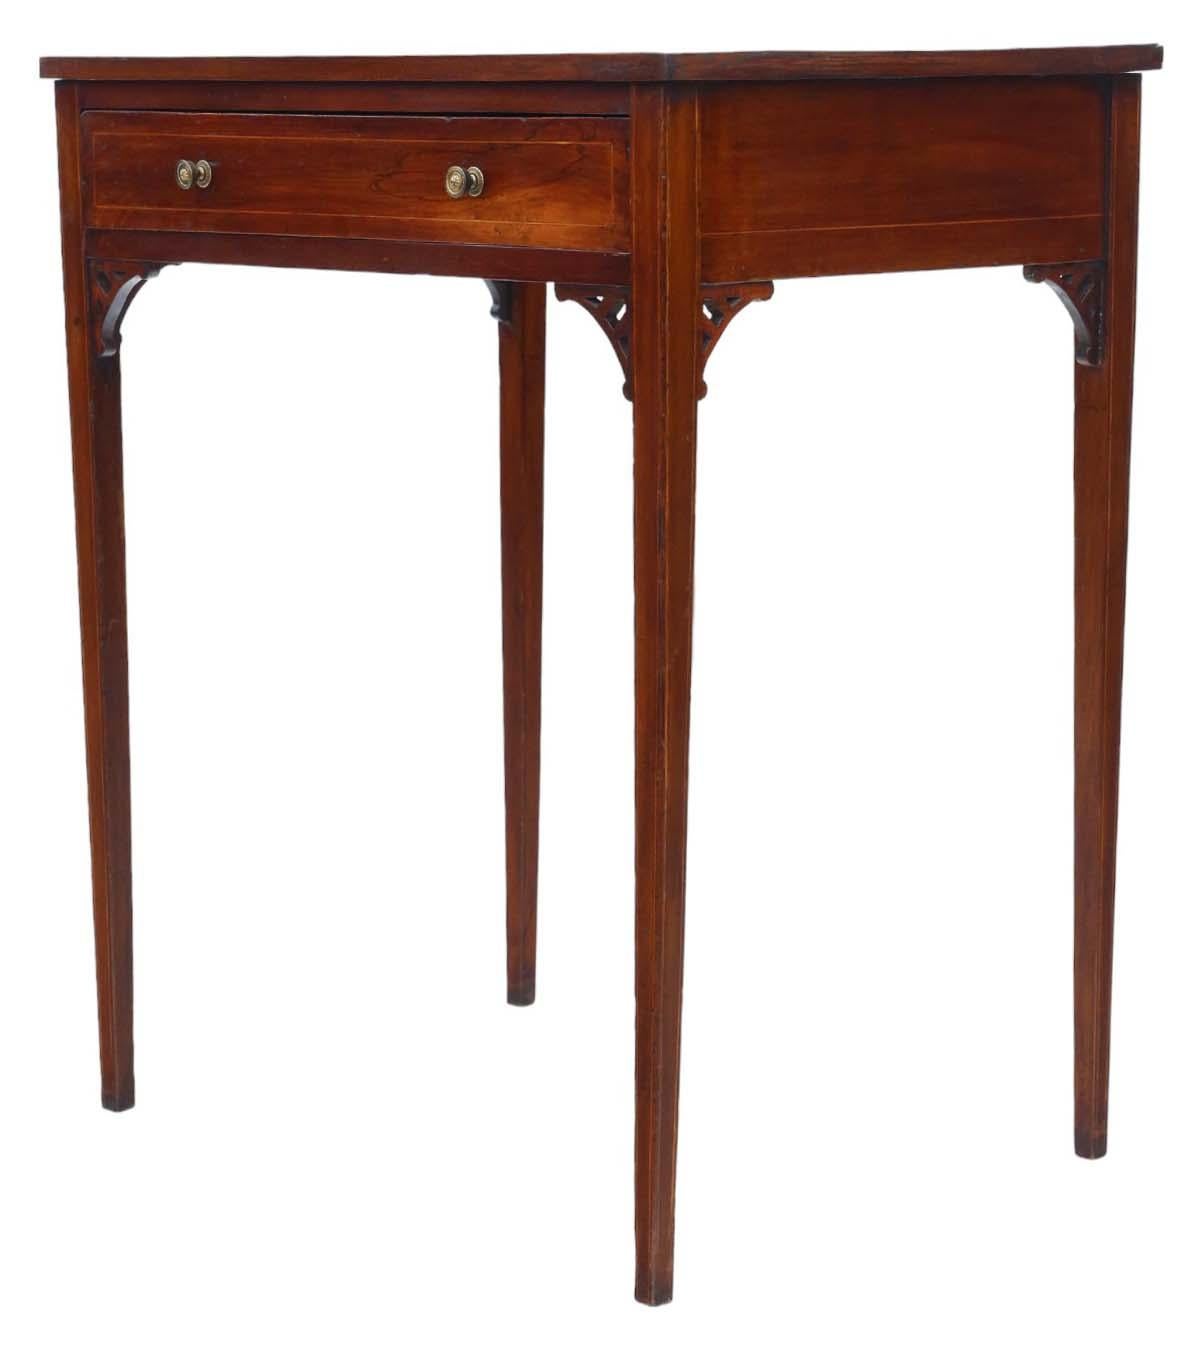 Early 20th Century Antique Fine Quality C1900 Inlaid Mahogany Ladies Writing Table Desk Dressing For Sale